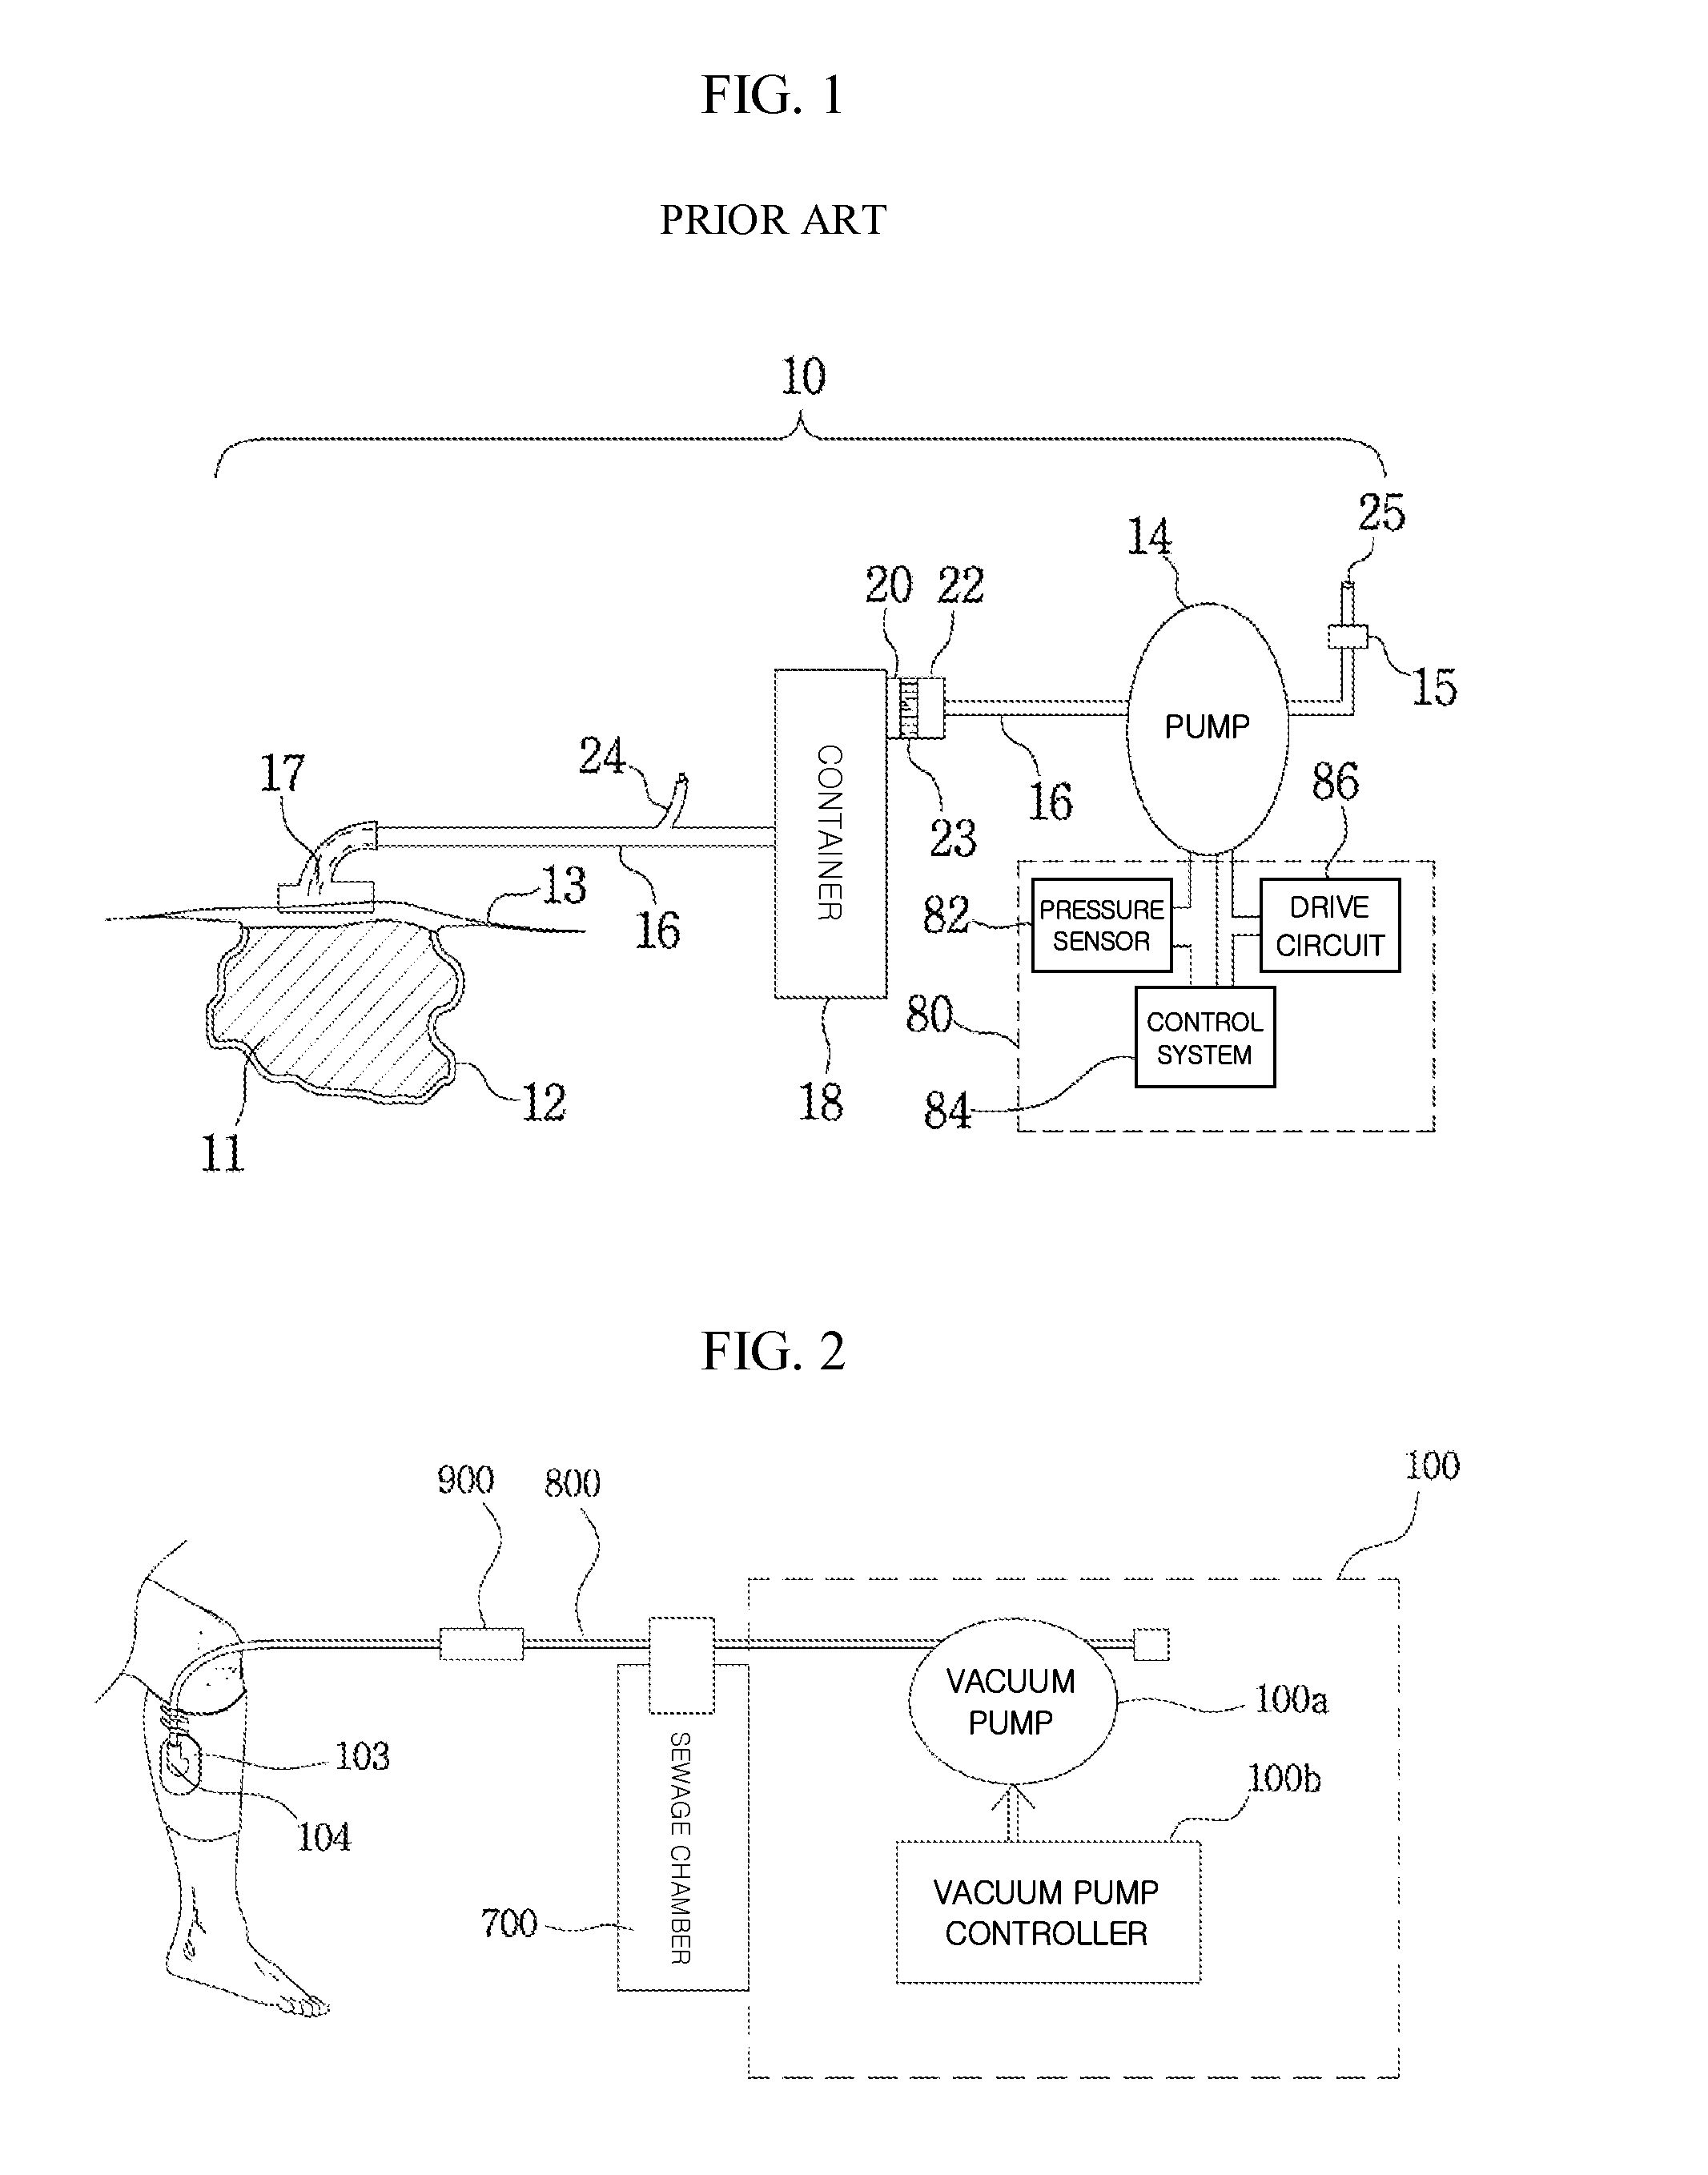 Portable vacuum generation device, and medical suction device using same